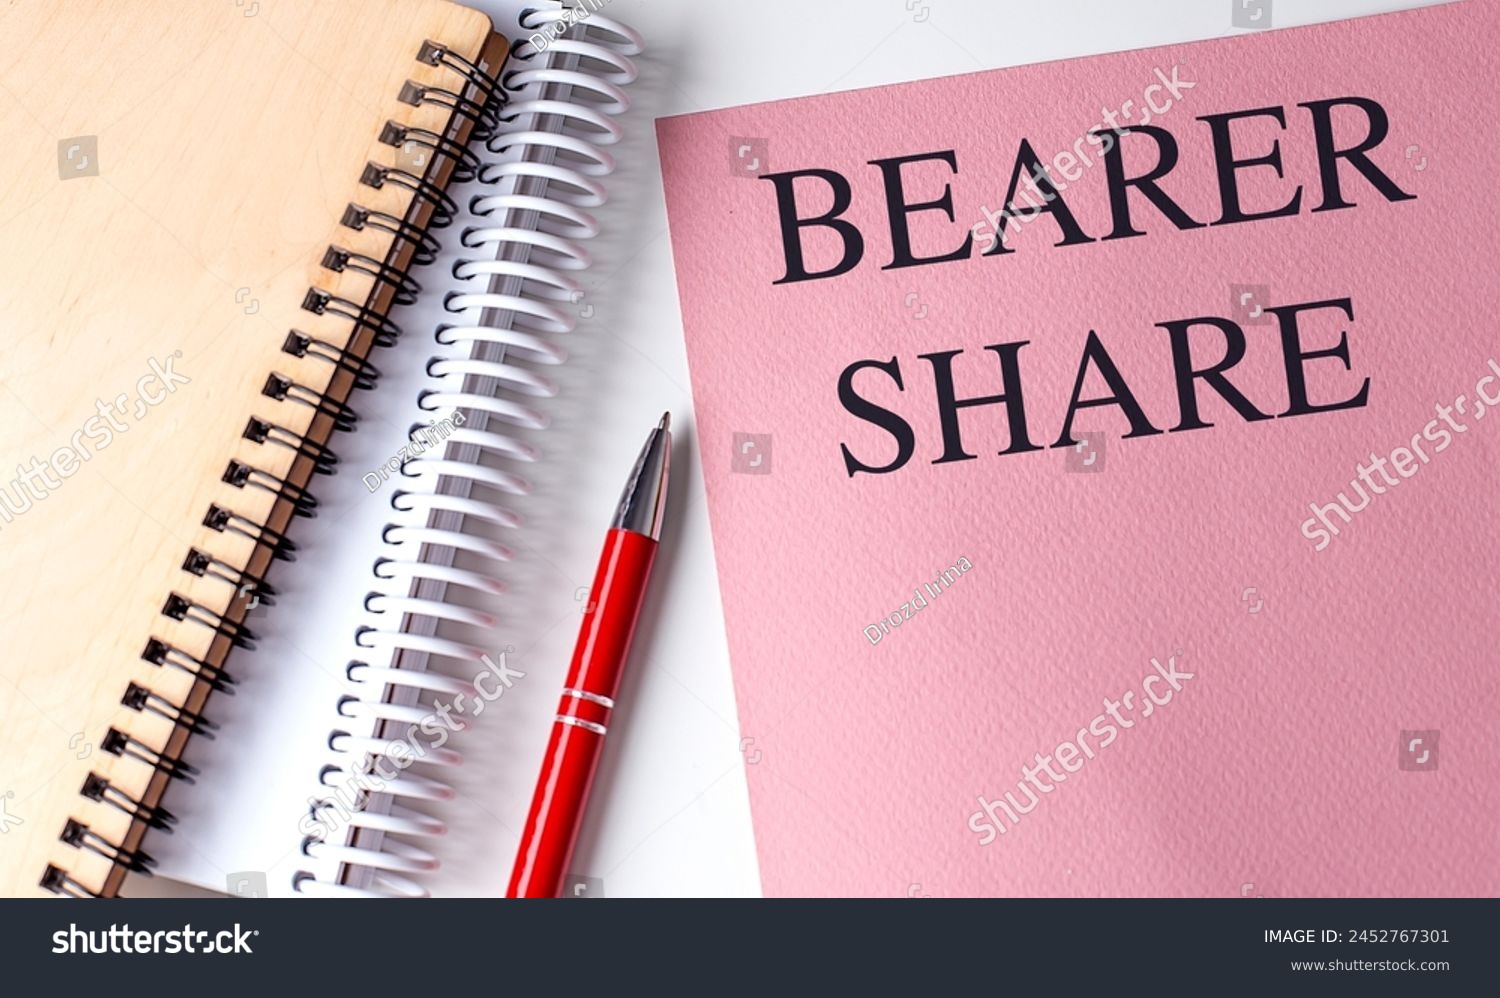 BEARER SHARE text on a pink paper with notebooks .  #2452767301